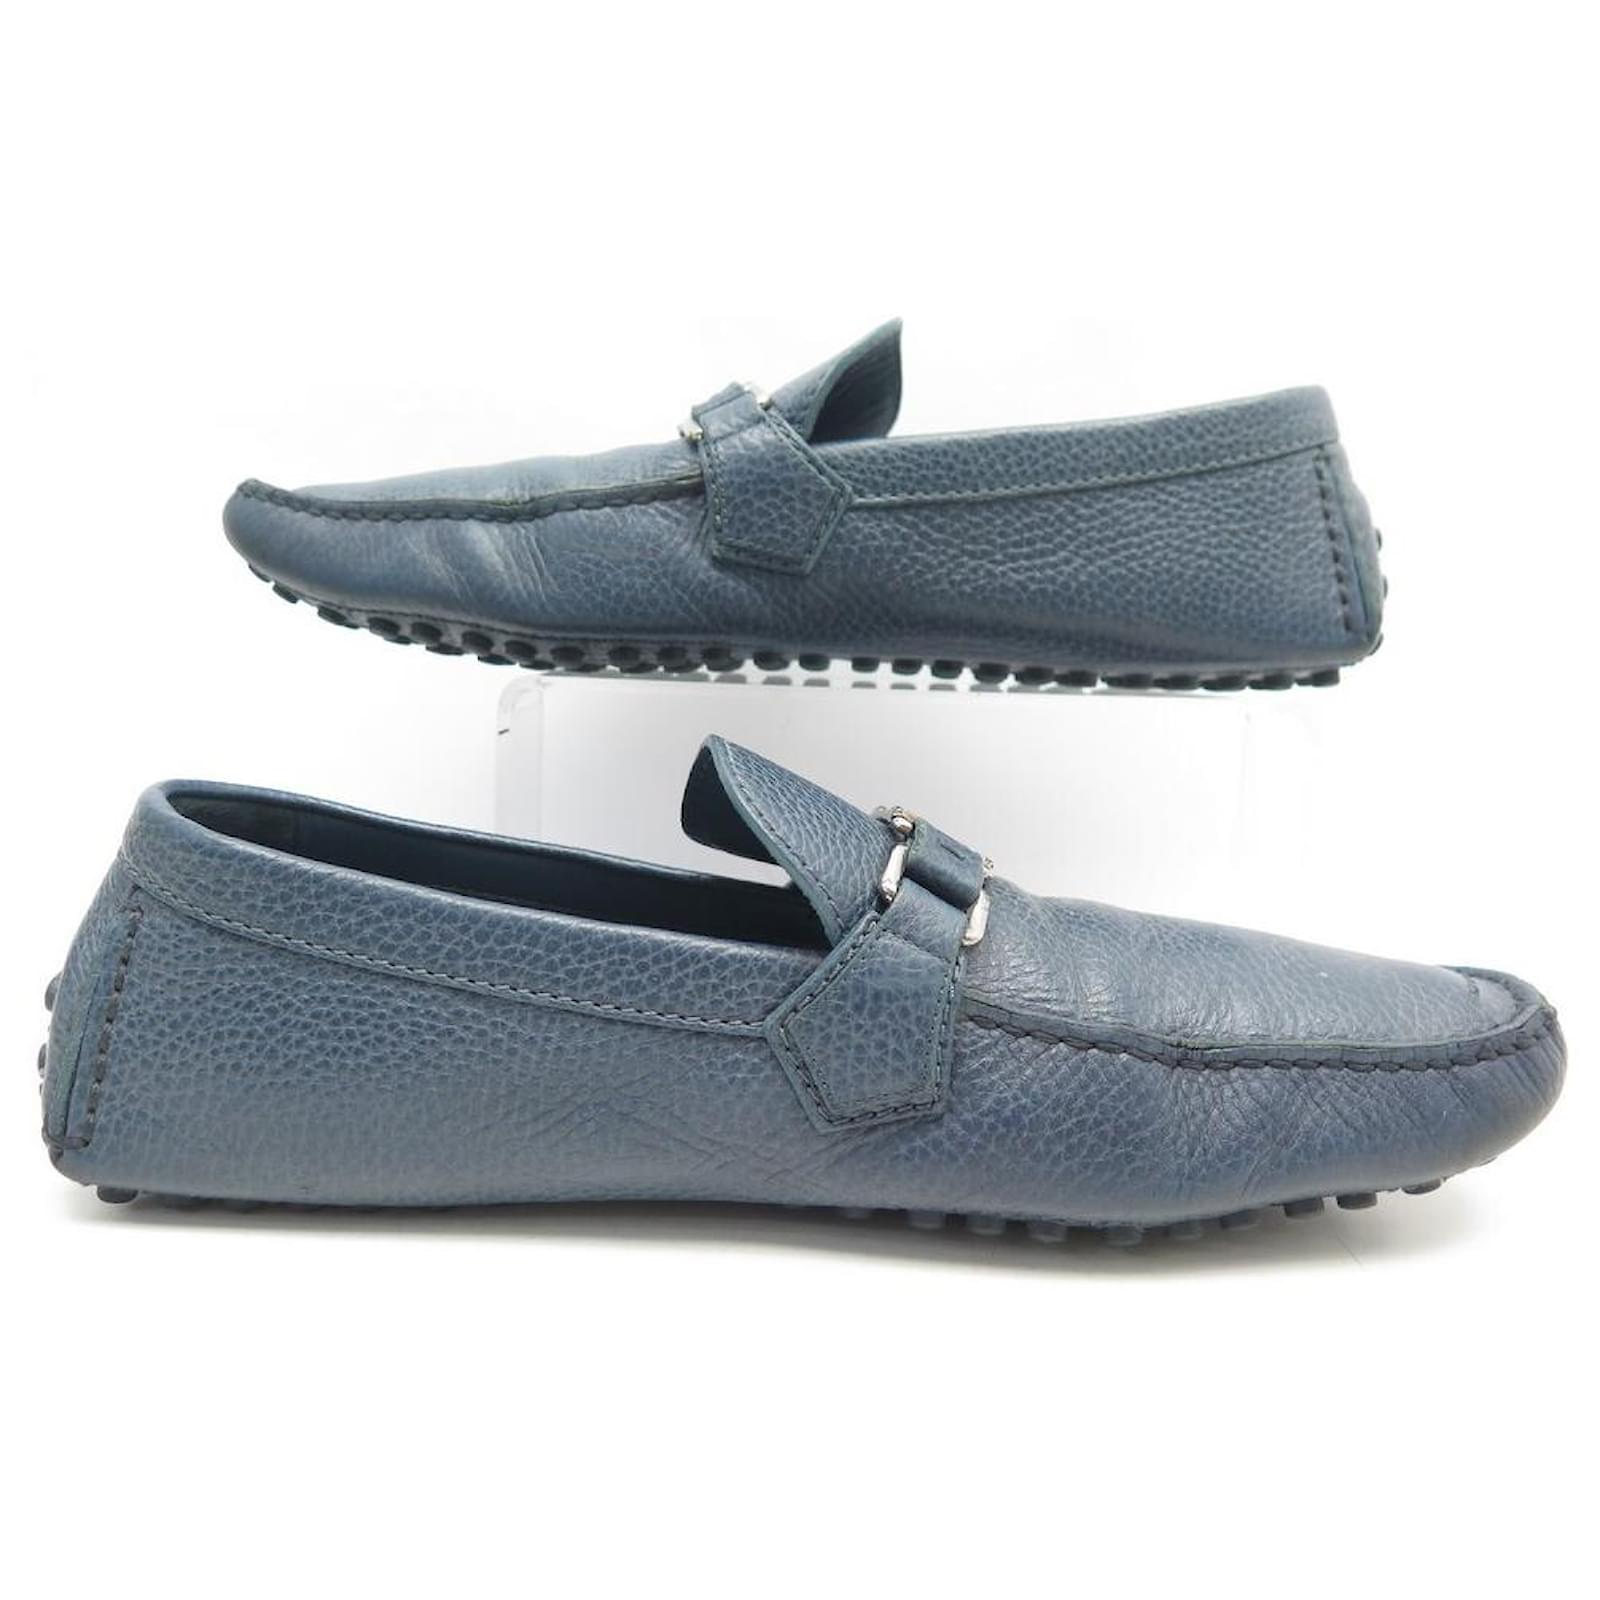 LOUIS VUITTON HOCKENHEIM MOCCASIN SHOES 10 44 BLUE LEATHER LOAFER SHOES ...